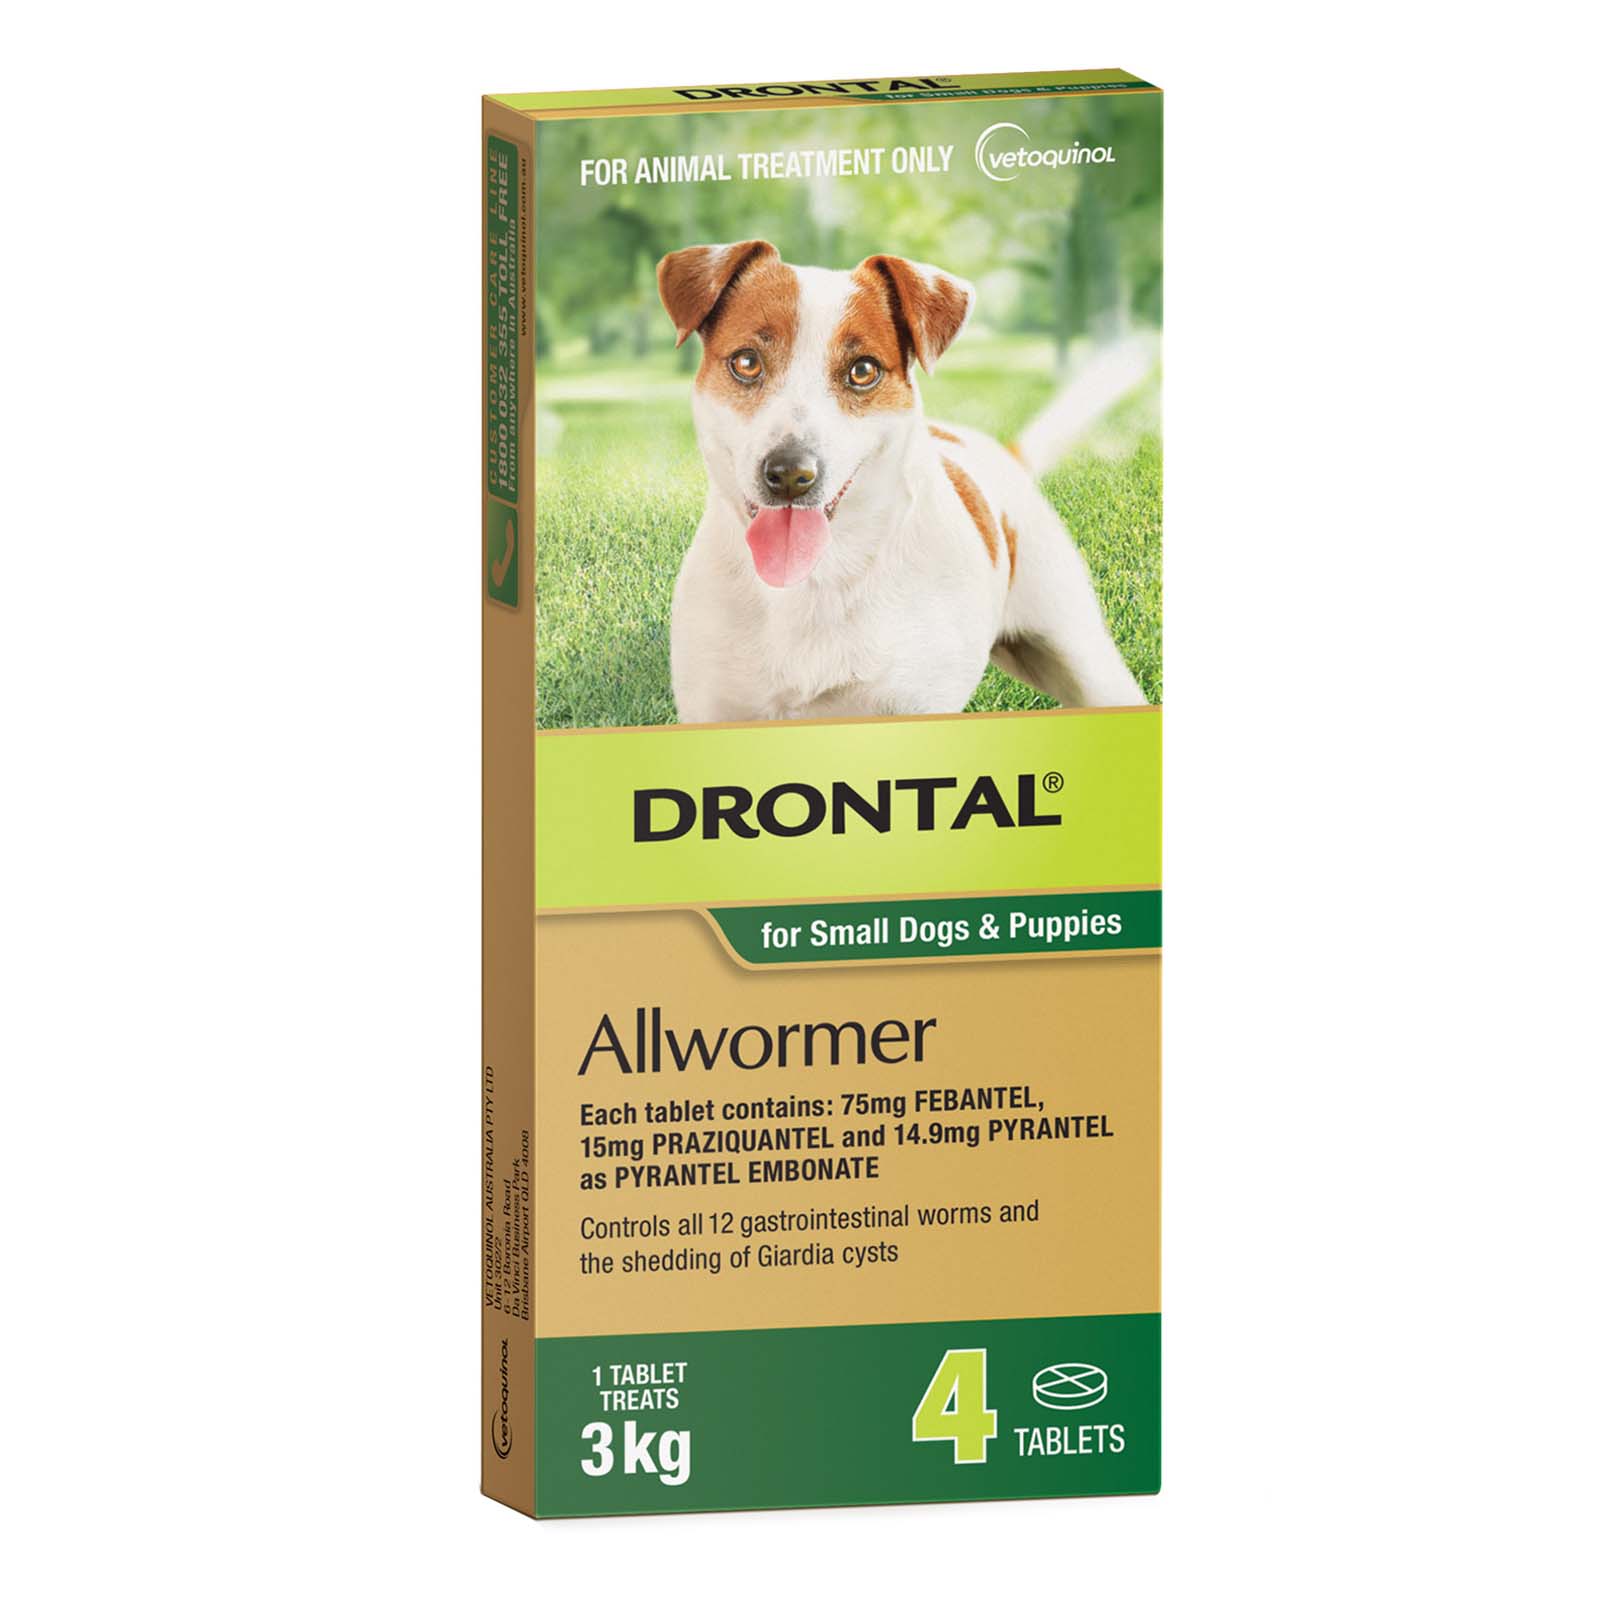 Drontal Wormers - Dogs Wormers Tabs For Dogs 3Kg (Green)